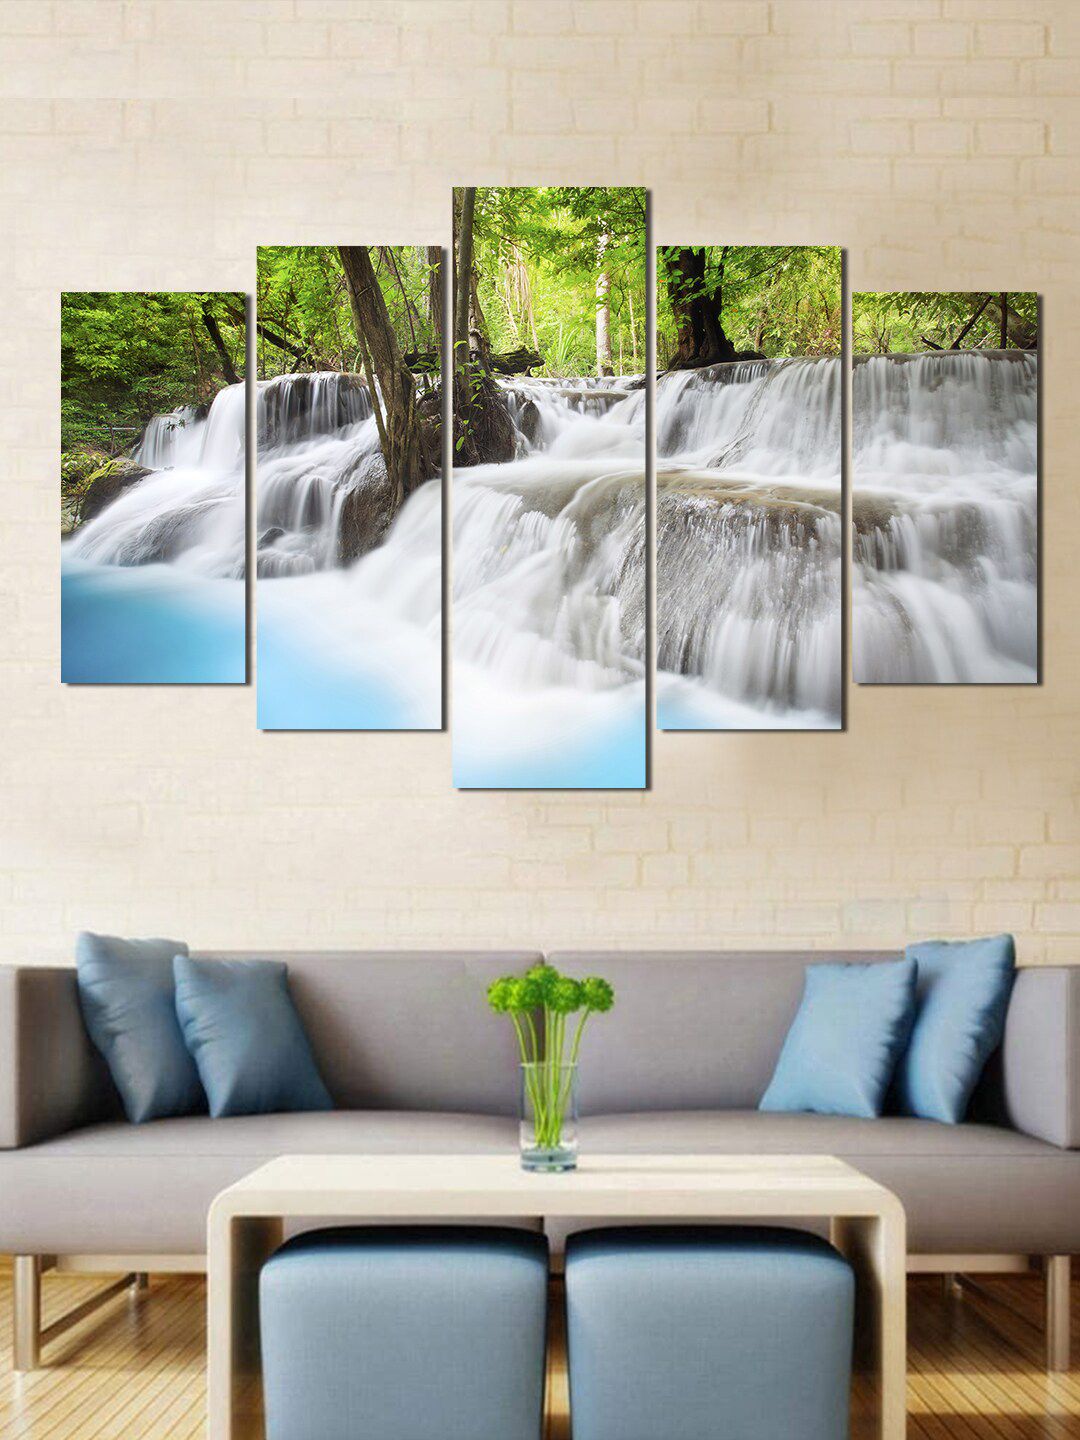 WENS Set of 5 Green & White Printed Wall Art Price in India